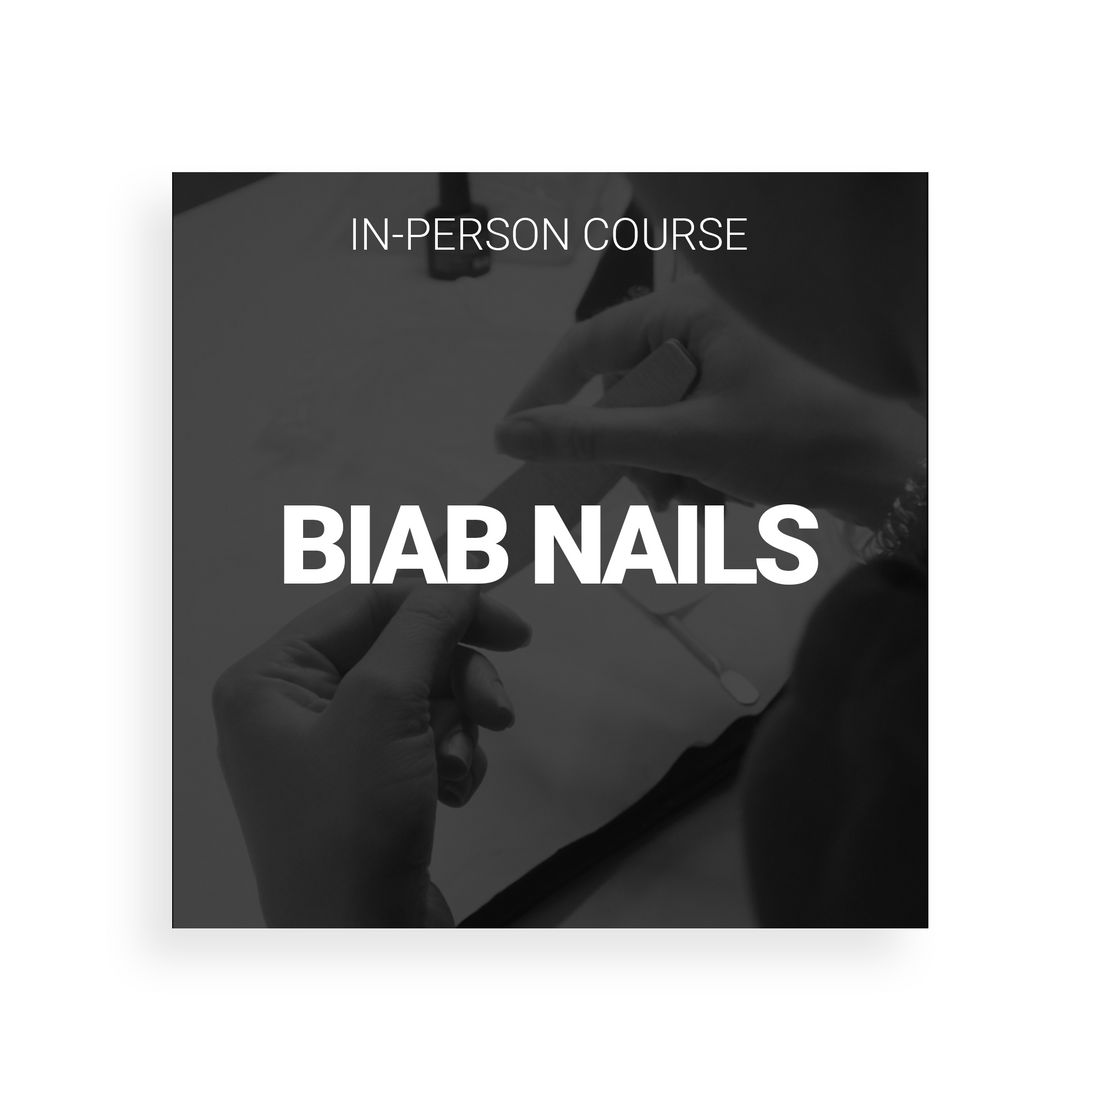 BIAB (BUILDER IN A BOTTLE) NAILS + E-FILE TRAINING